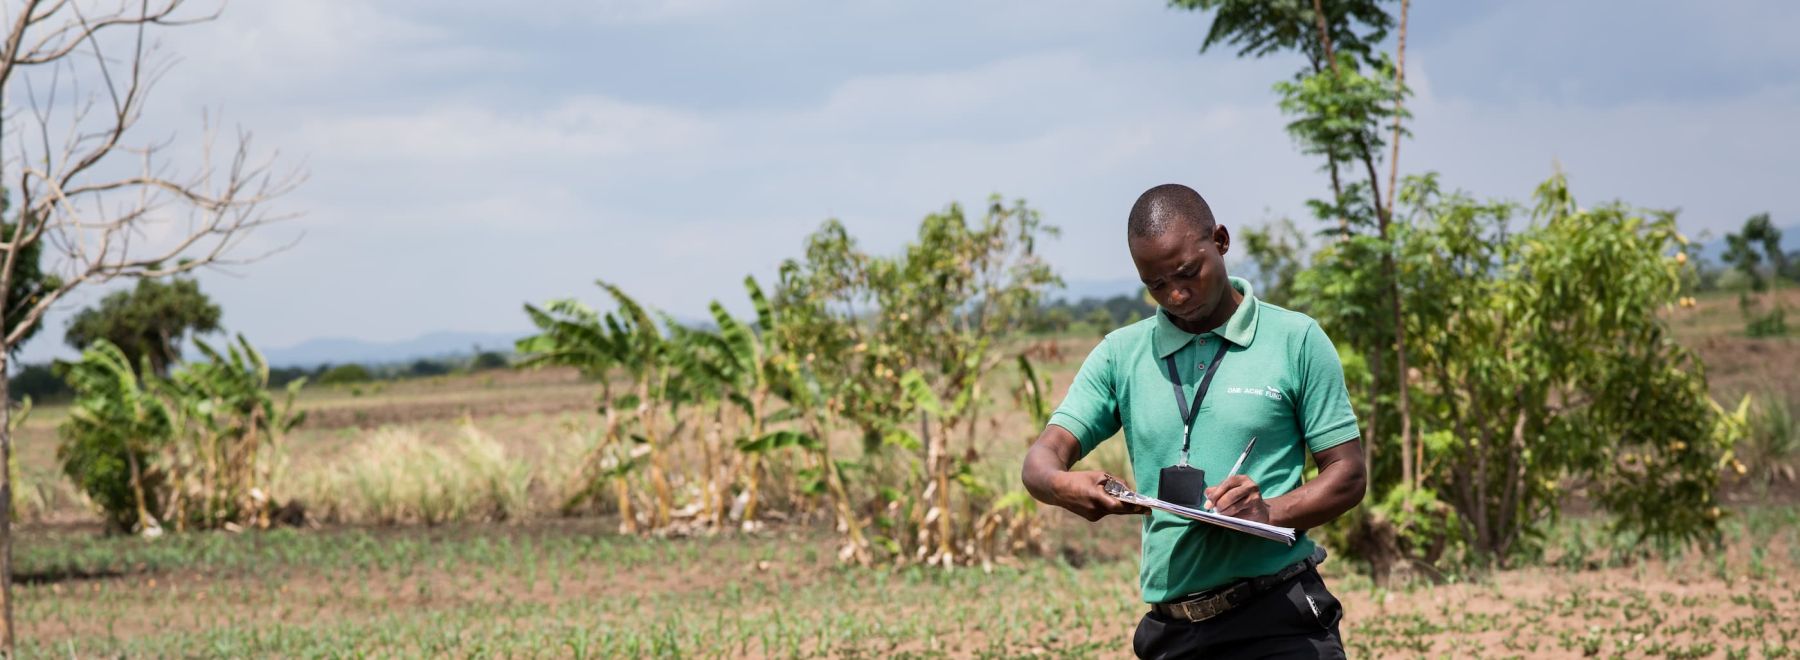 A One Acre Fund staff member reviewing seed performance in a farmer's field in Malawi